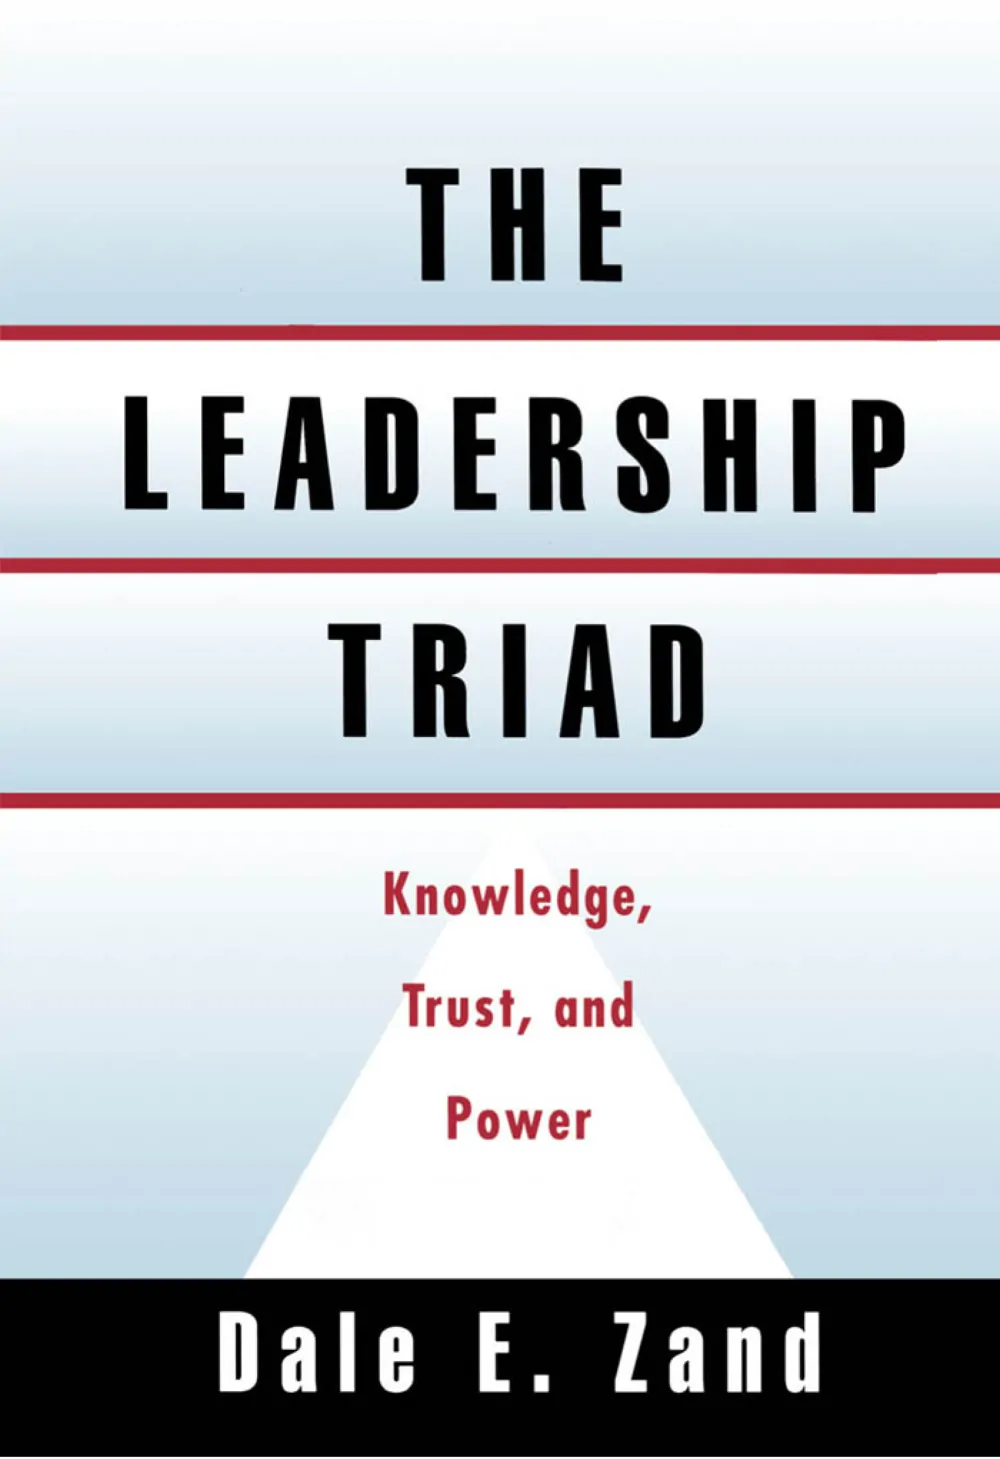 The Leadership Triad: Knowledge, Trust, and Power